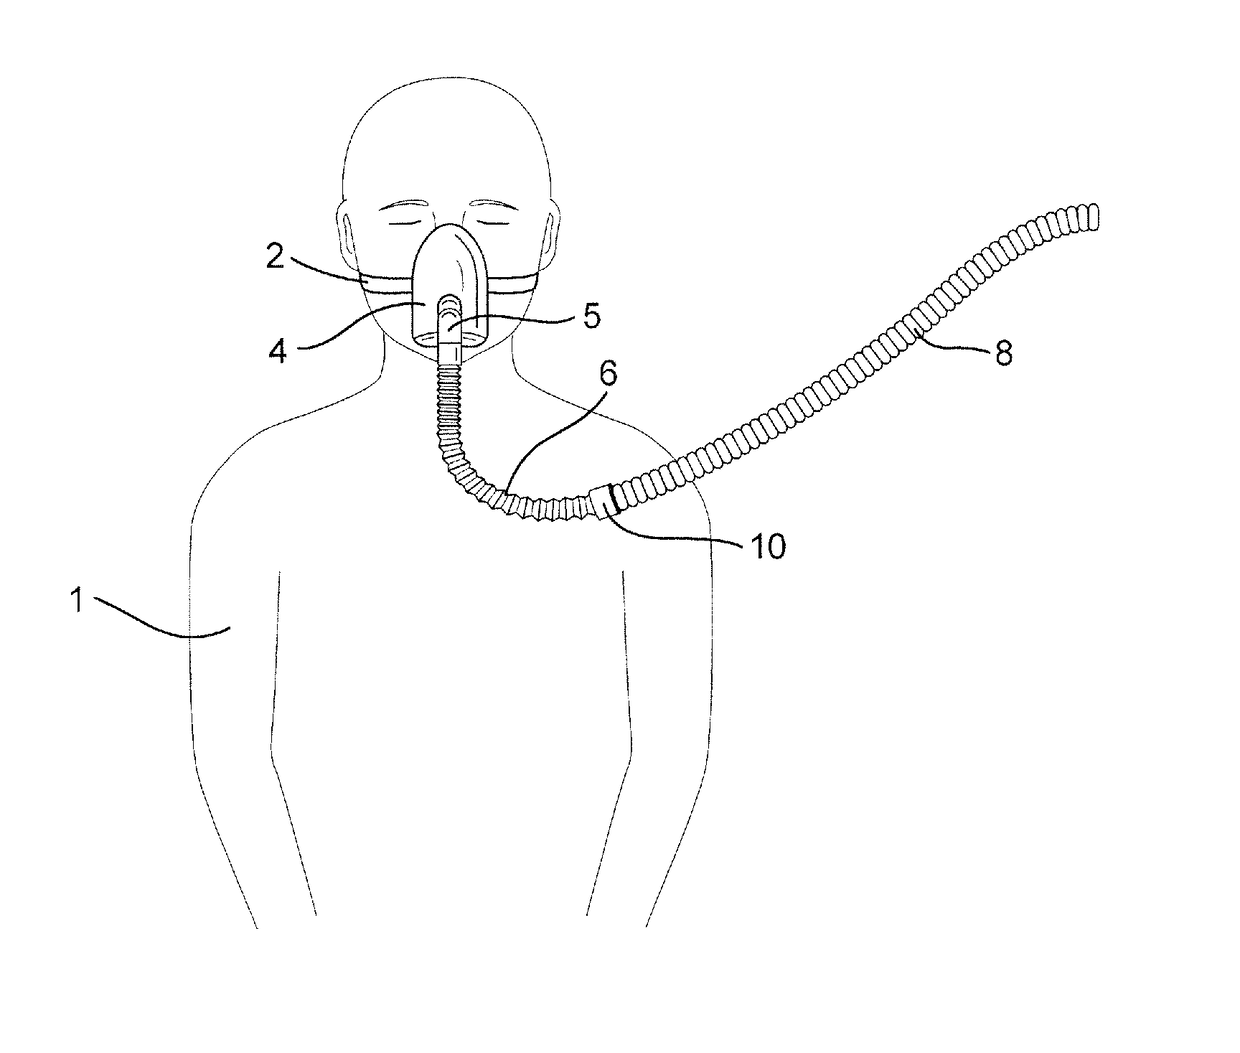 Retractable tube for CPAP